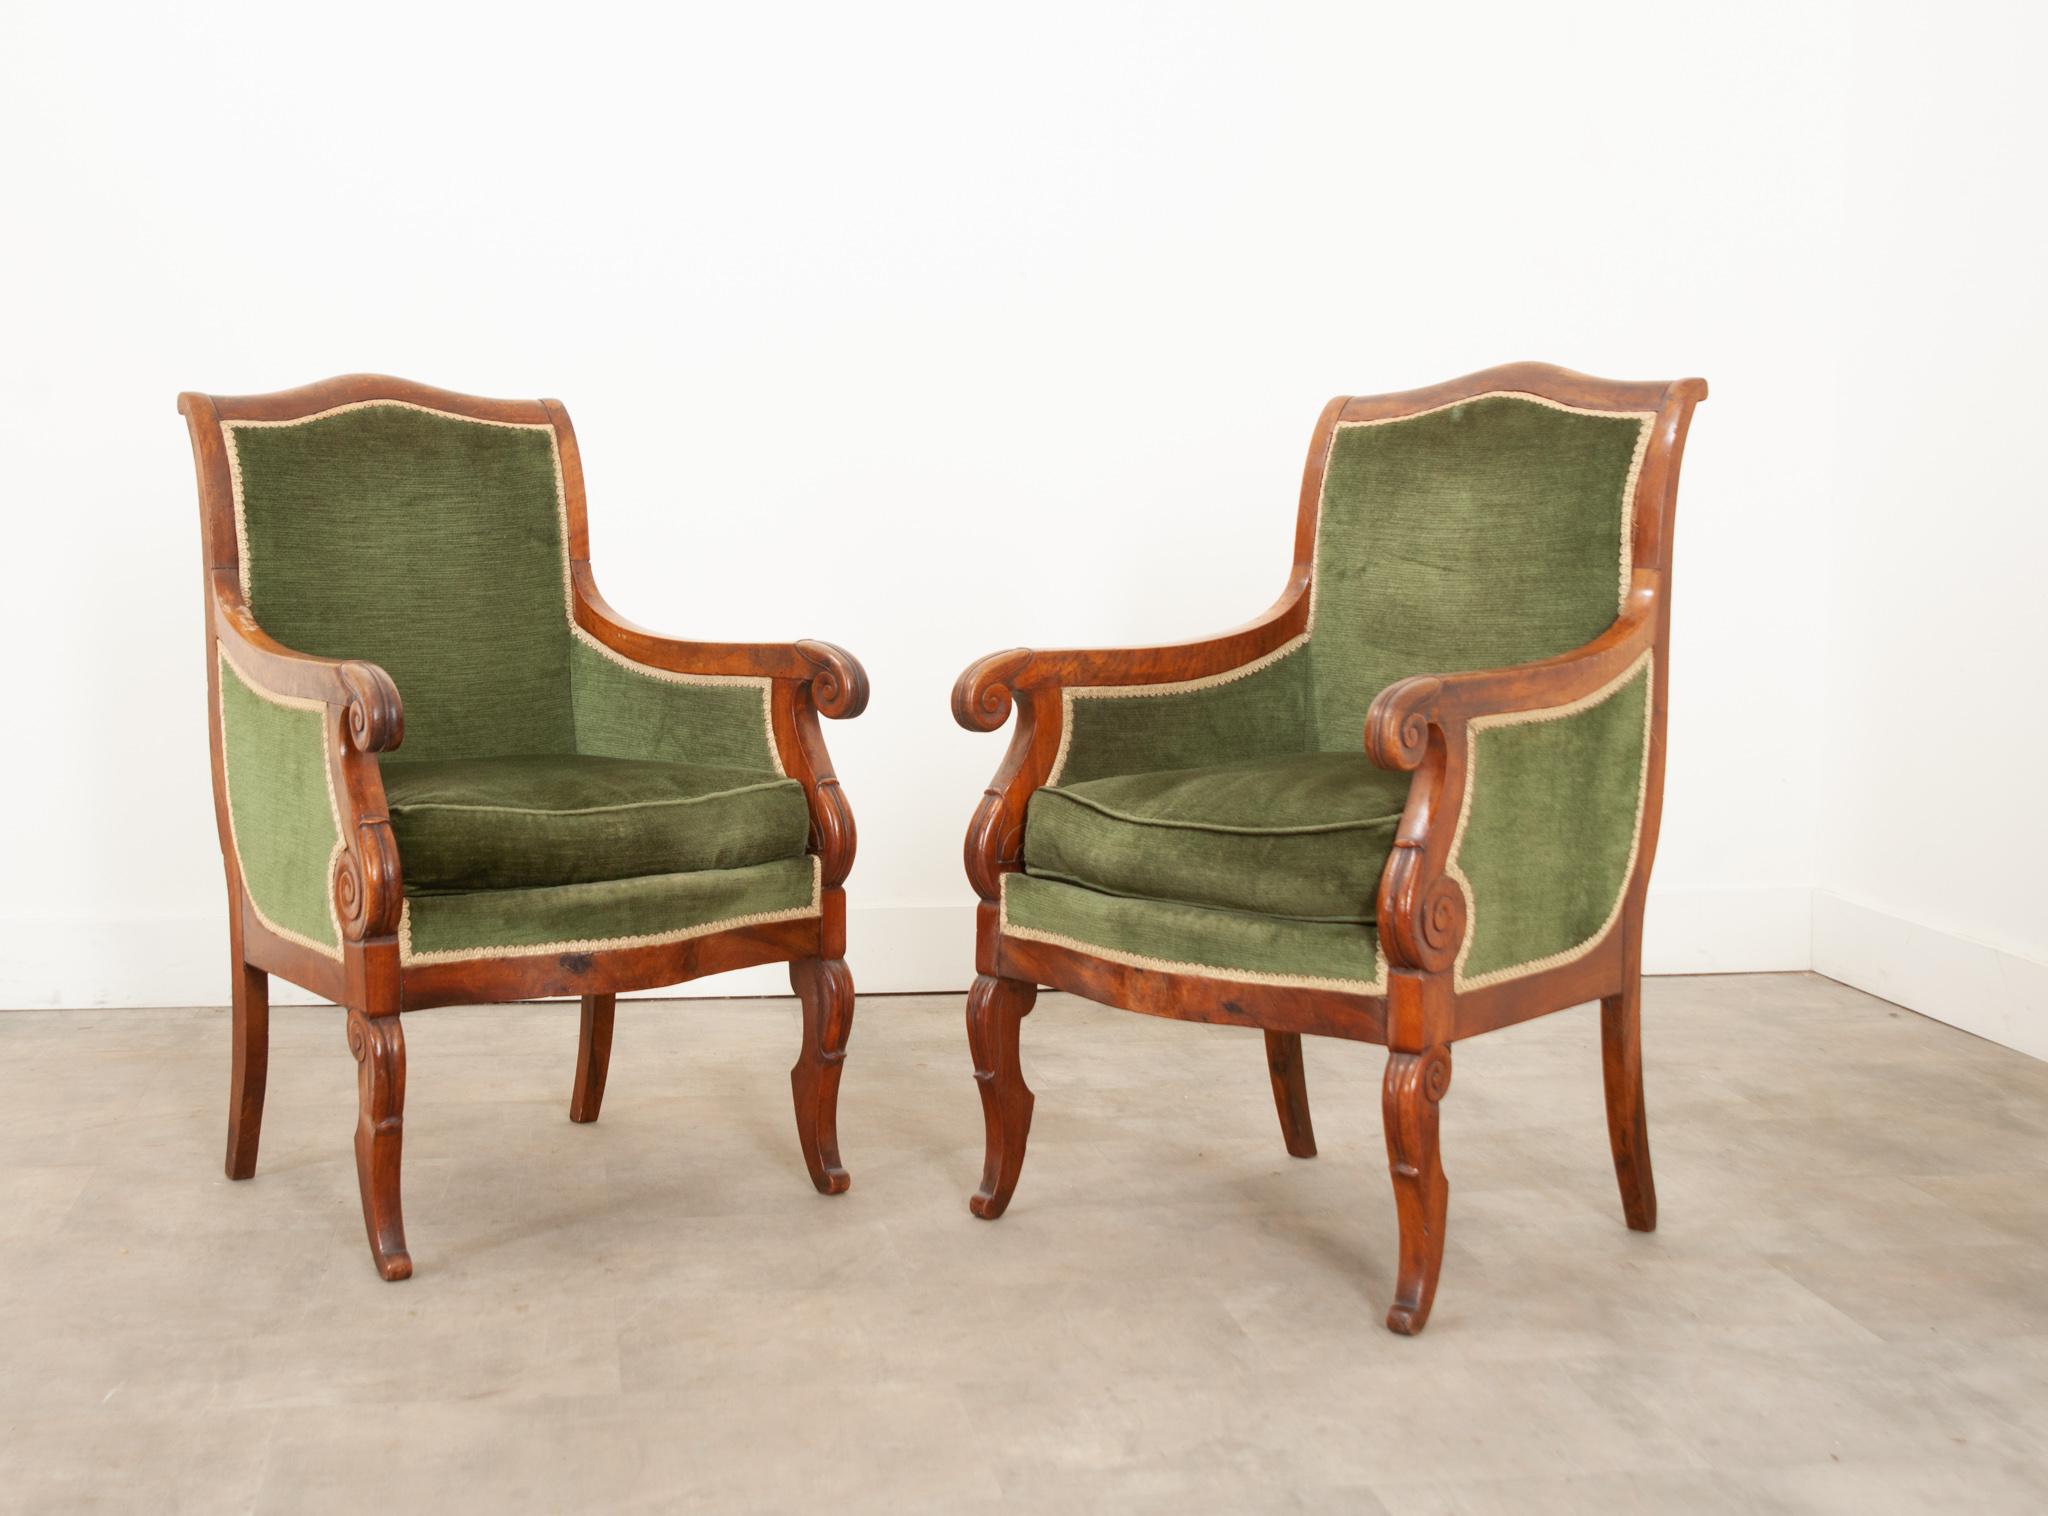 This flirty pair of French walnut bergeres is in wonderful antique condition. The frames are 19th century, hand carved with a deep trim and scrolling arms. Upholstered in plush emerald green velvet with a gold rick rack trim with additional